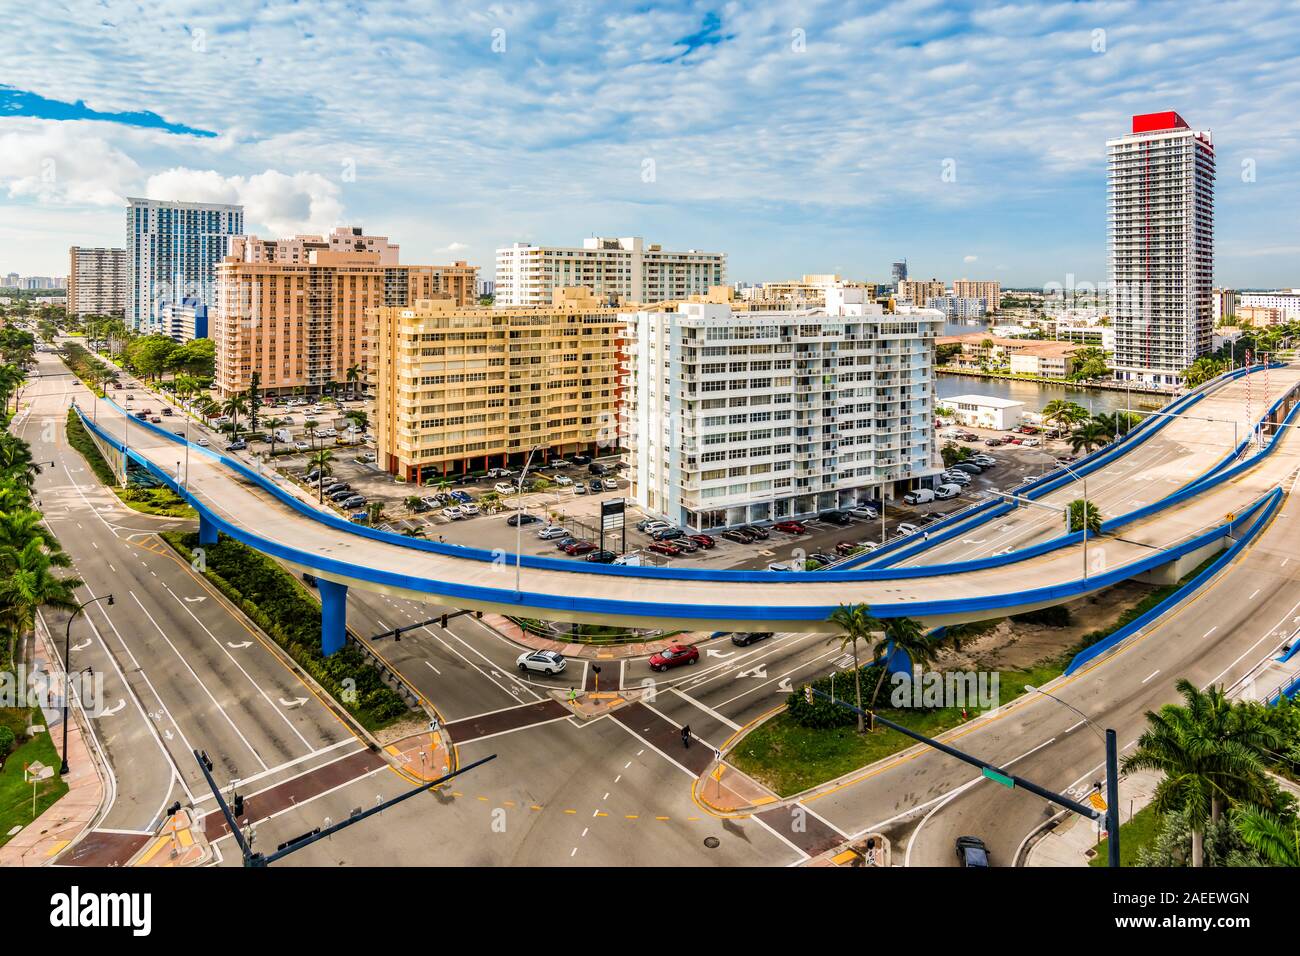 Hollywood, Fort Lauderdale, Florida. Downtown centre of Hallandale. Stock Photo